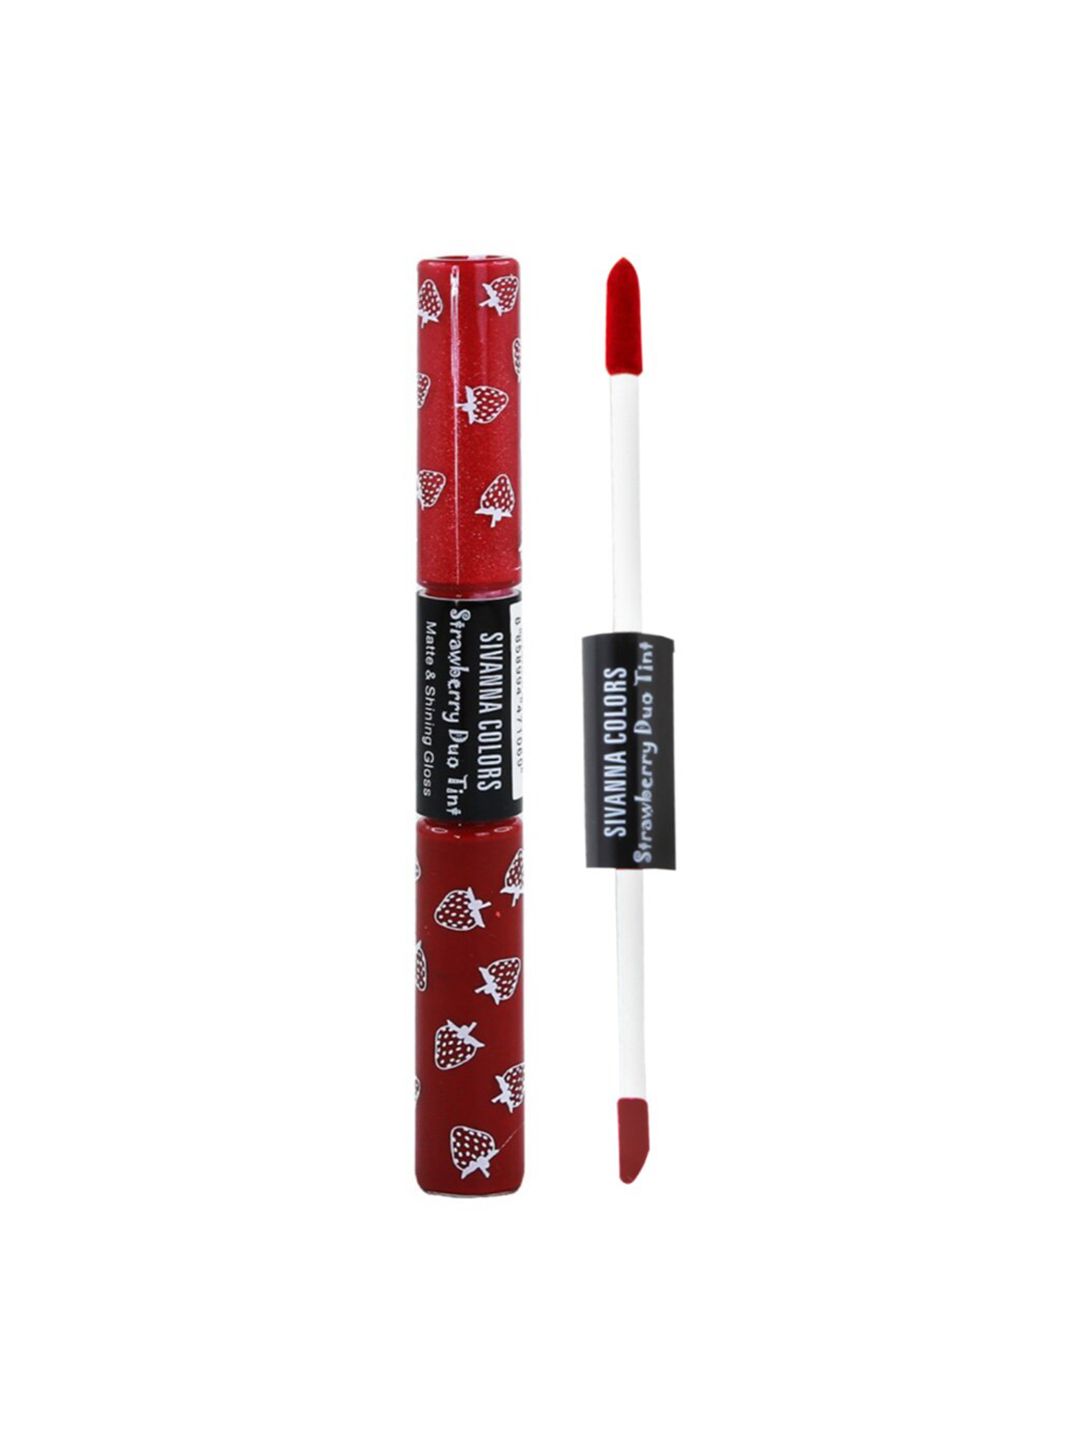 Sivanna Colors 2 in 1 Strawberry Duo Tint Matte & Shining Lip Gloss - DK035 09 Price in India